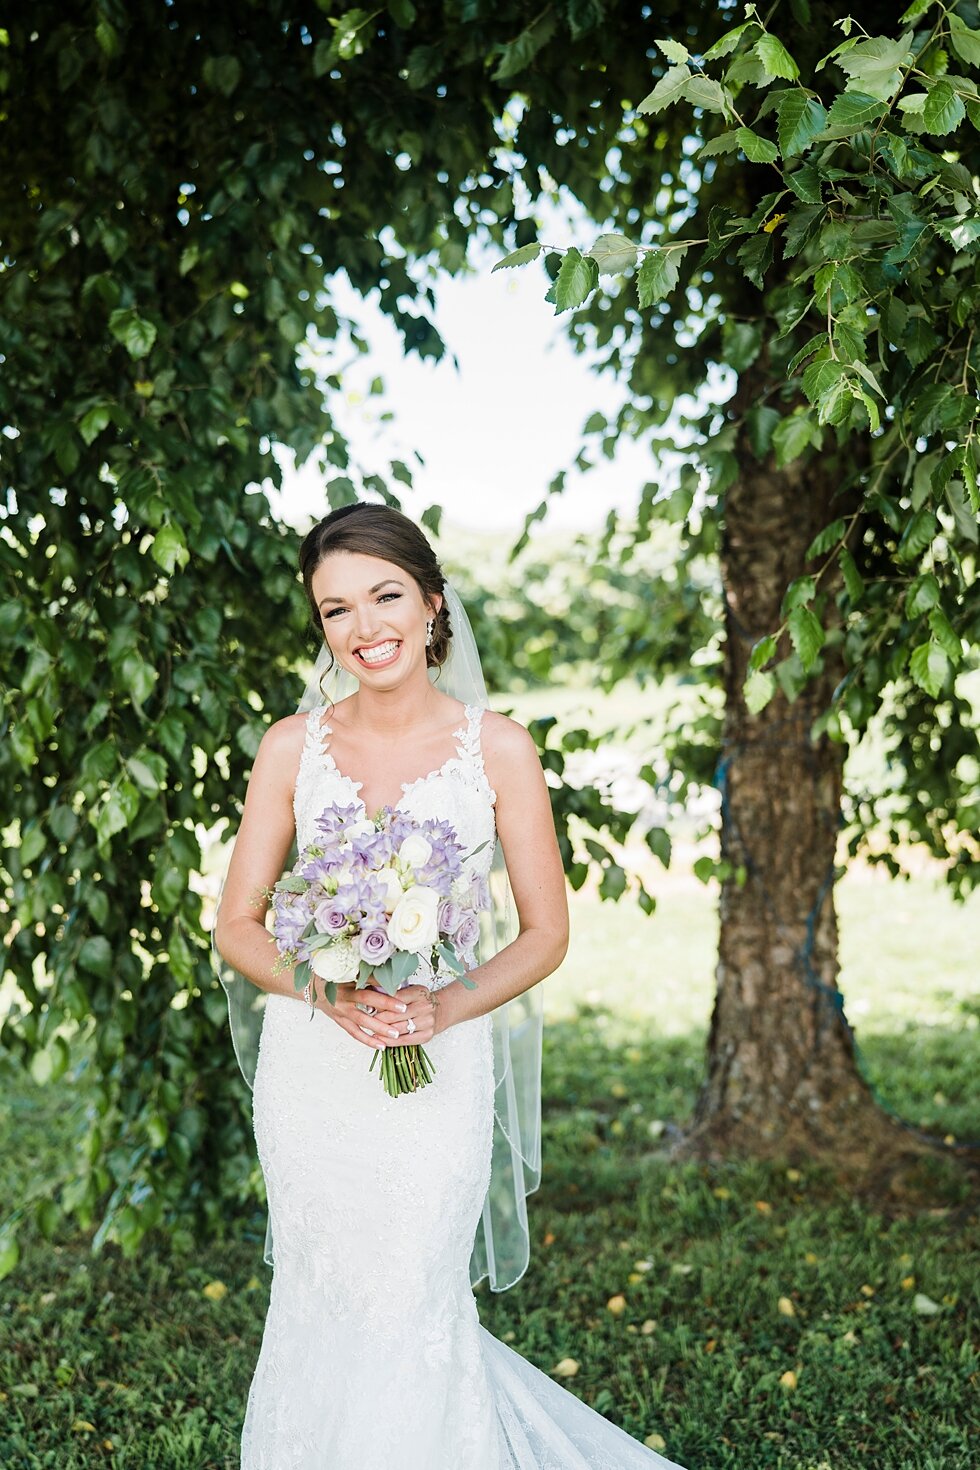  Bridal photos with stunning greenery in the background of the bride smiling and holding her lavender wedding bouquet. wedding ceremony details stunning photography married midwest louisville kentucky #weddingphoto #love #justmarried #midwestphotogra